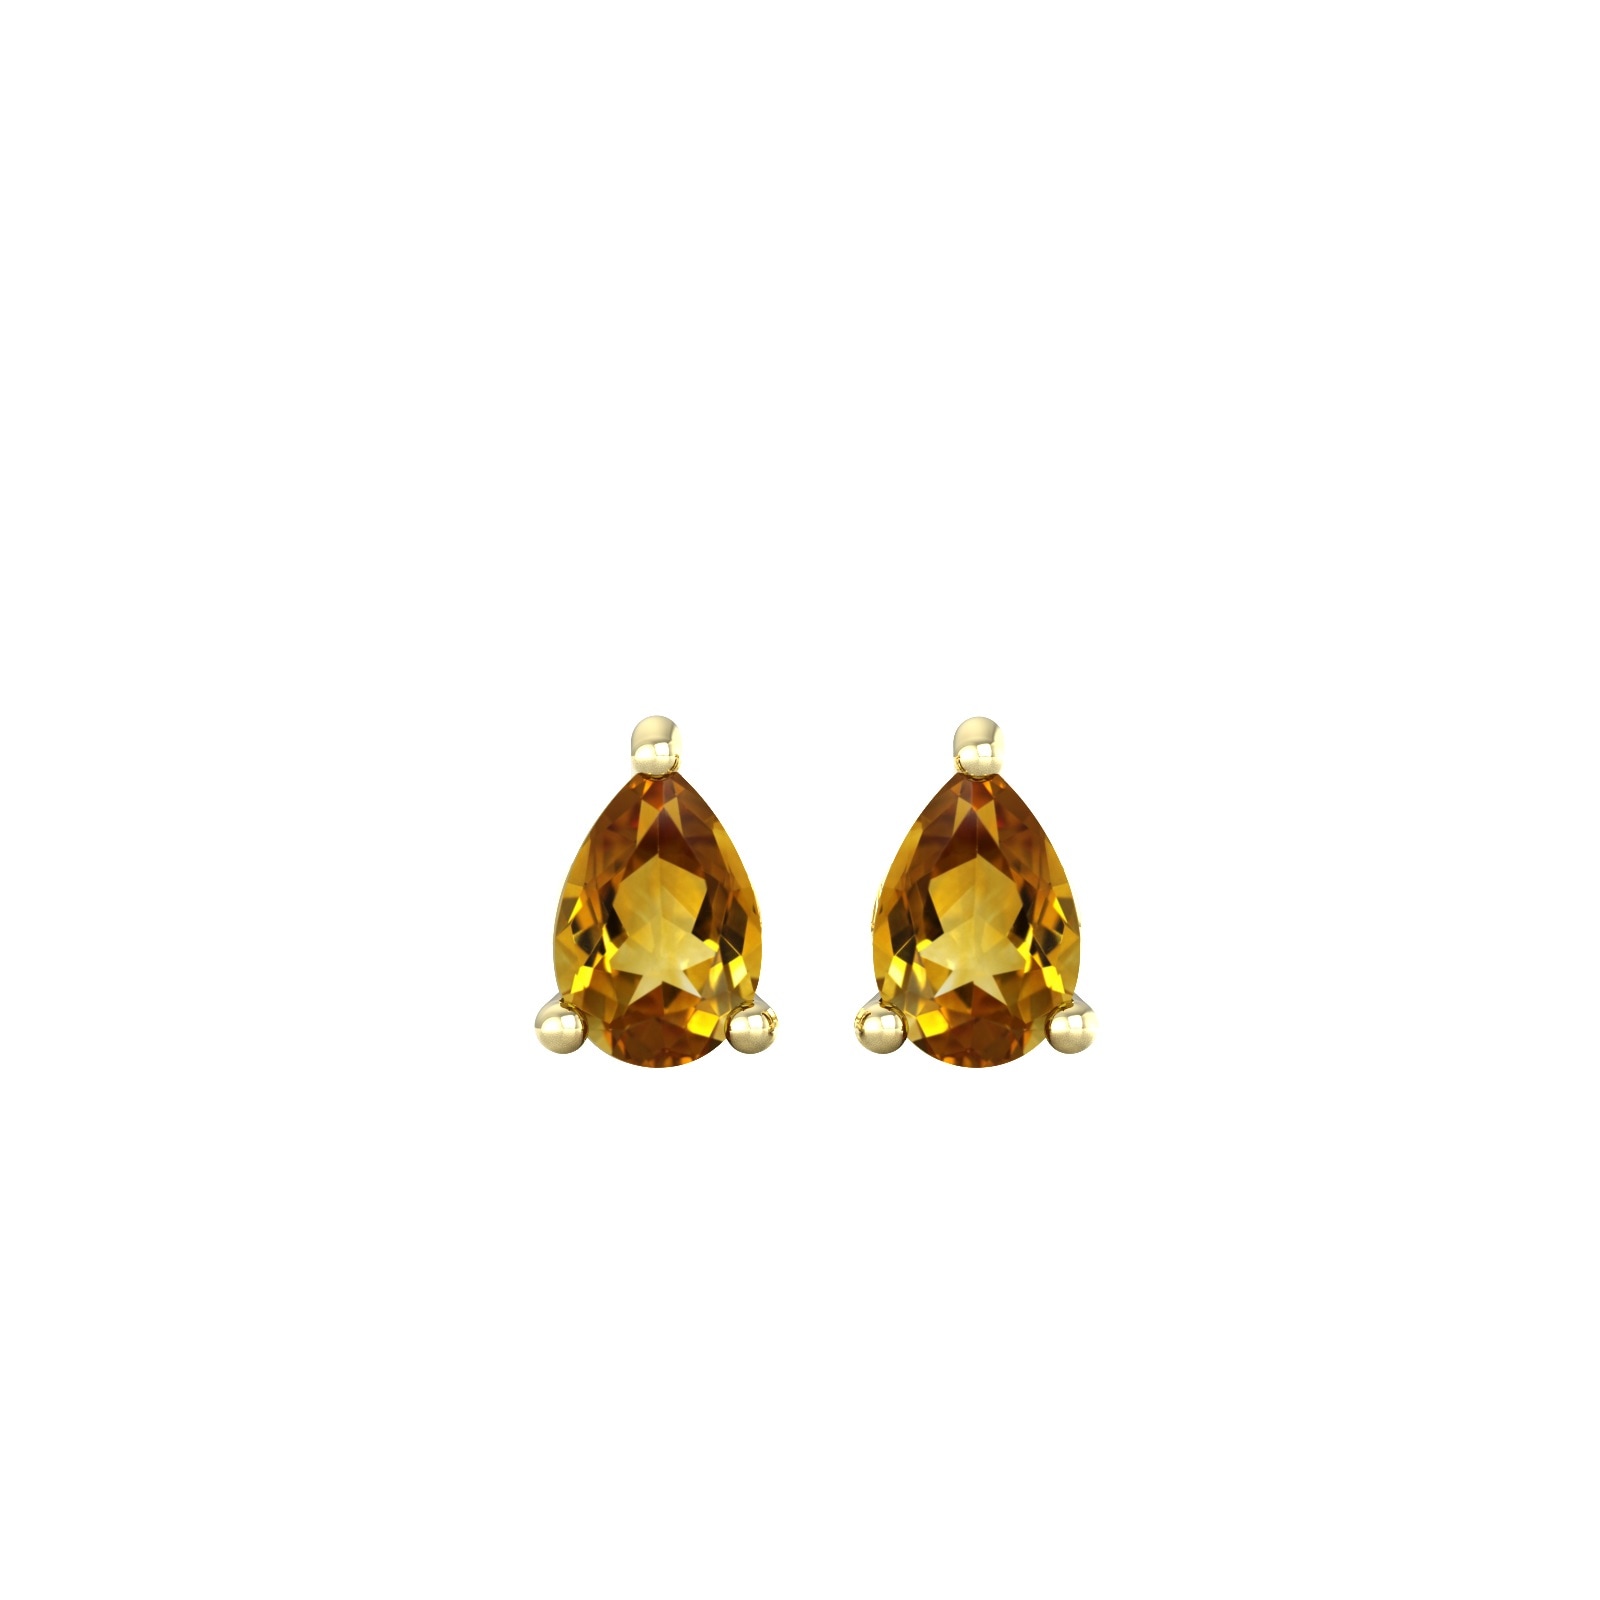 9ct Yellow Gold 4 Claw Pear Cut Citrine Stud Earrings